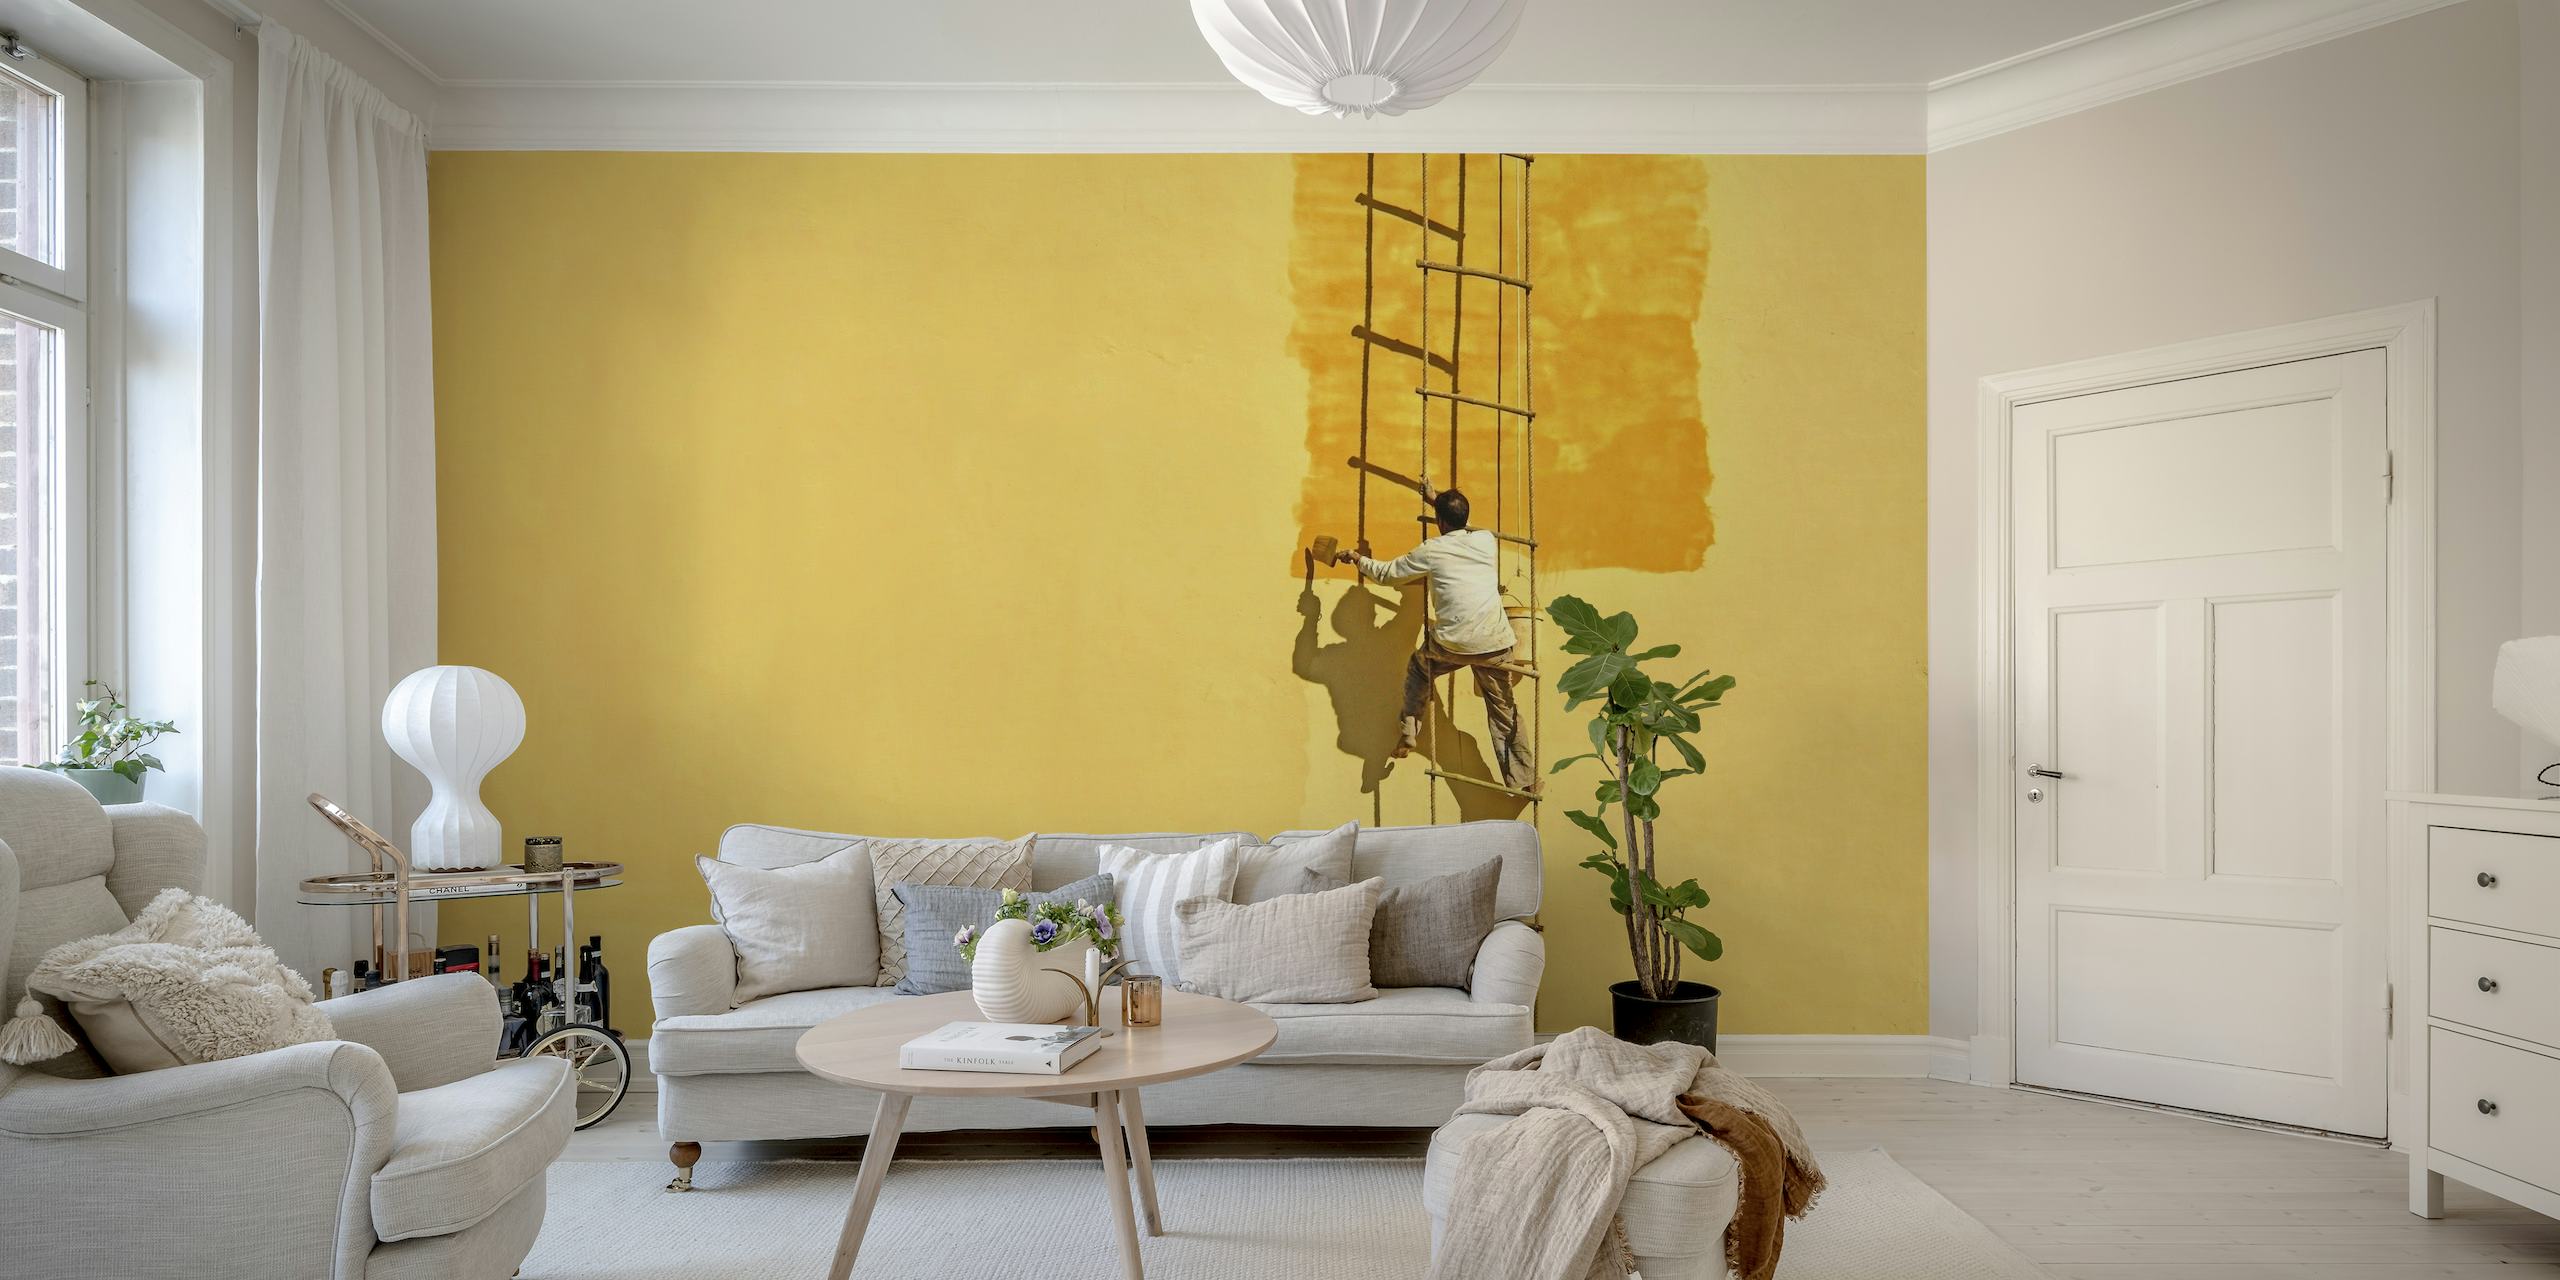 Silhouetted painter on ladder against yellow wall mural